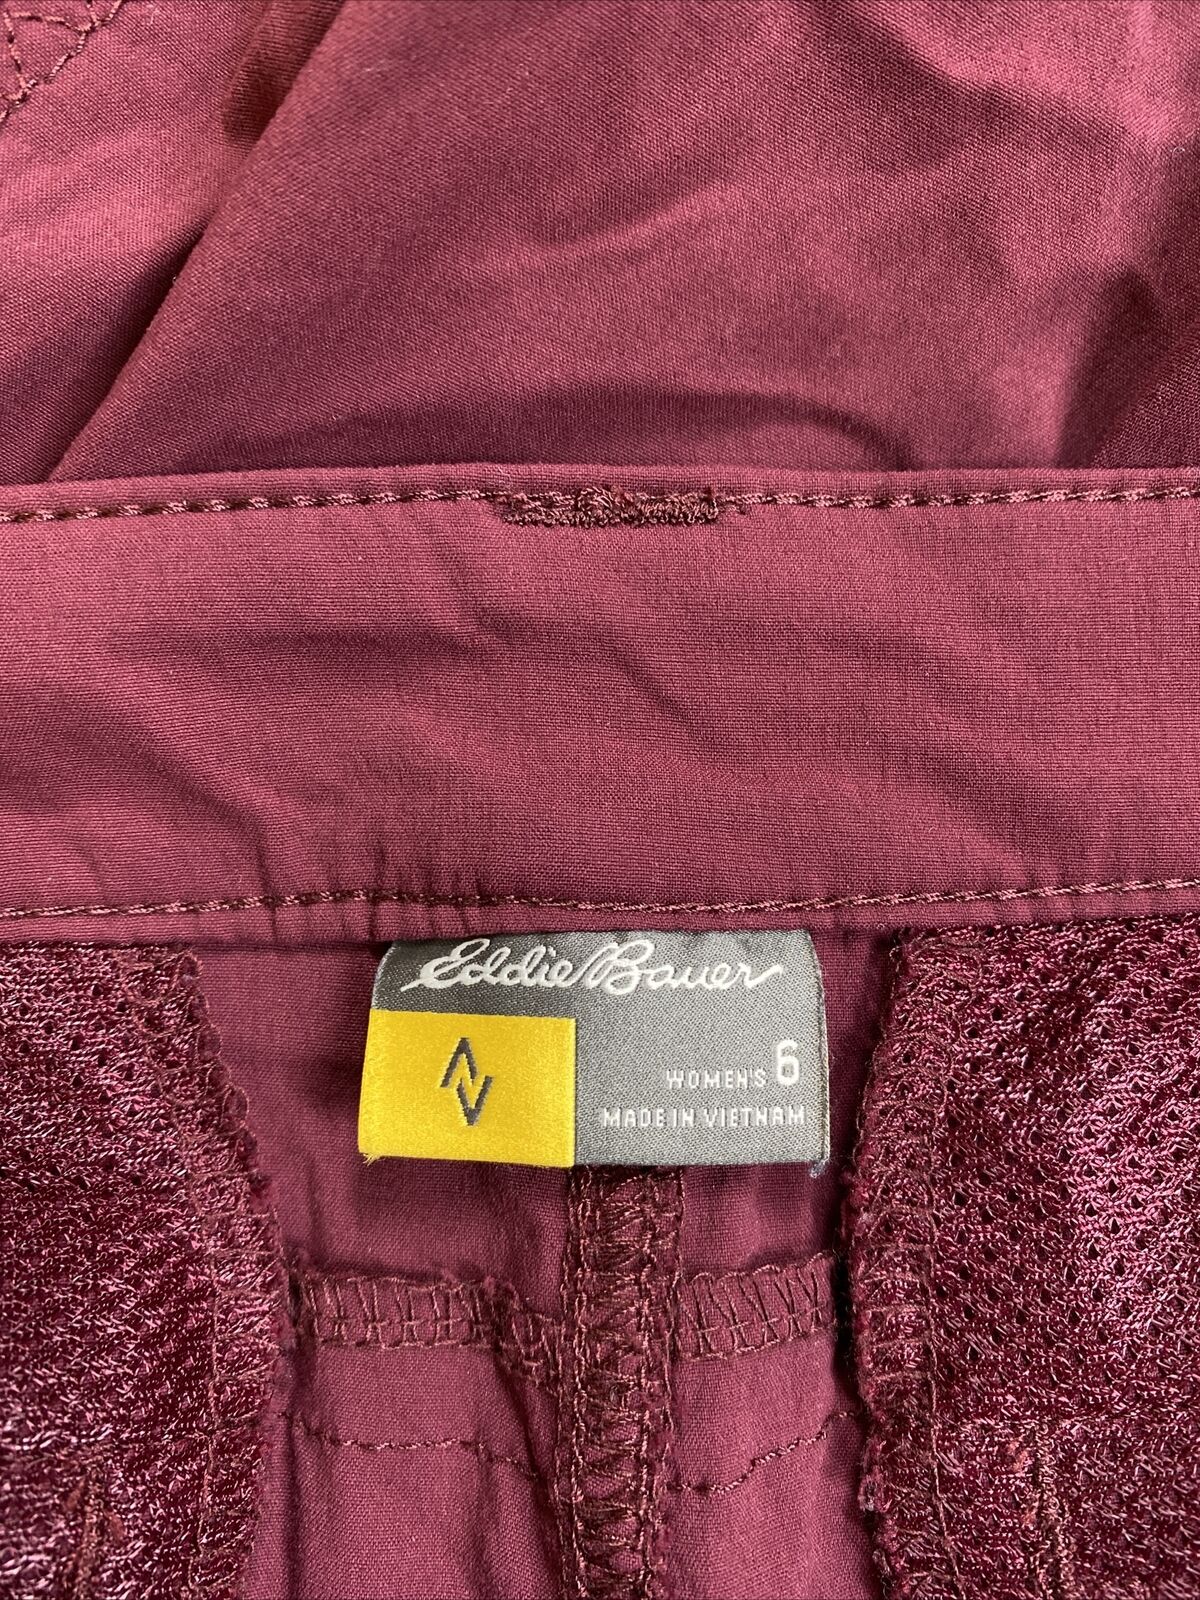 Eddie Bauer Women's Red Burgundy Nylon Ruched Cropped Hiking Pants - 6